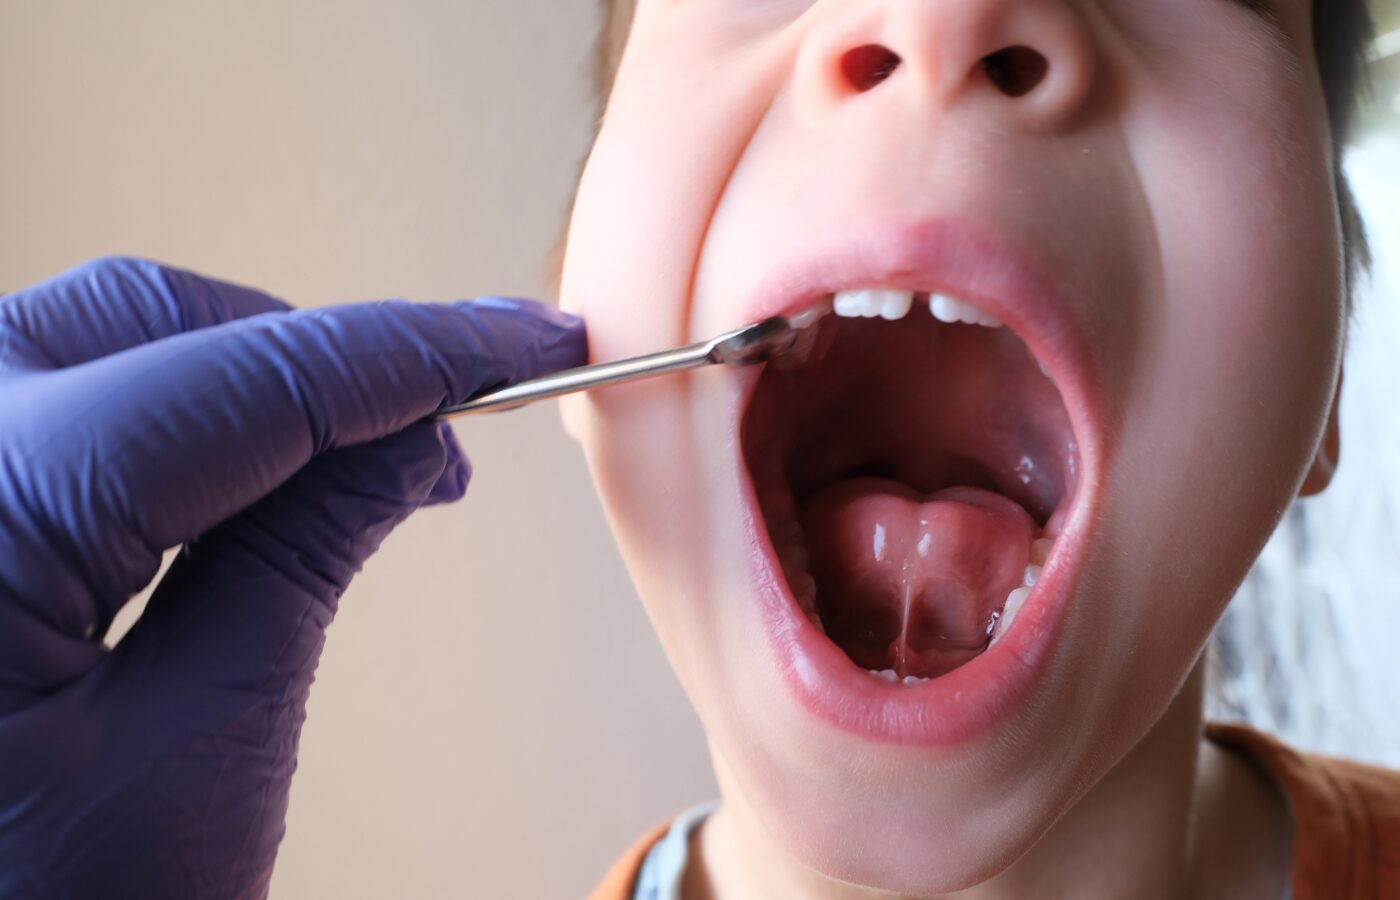 Image of a gloved hand examining the mouth of a child with a tongue tie